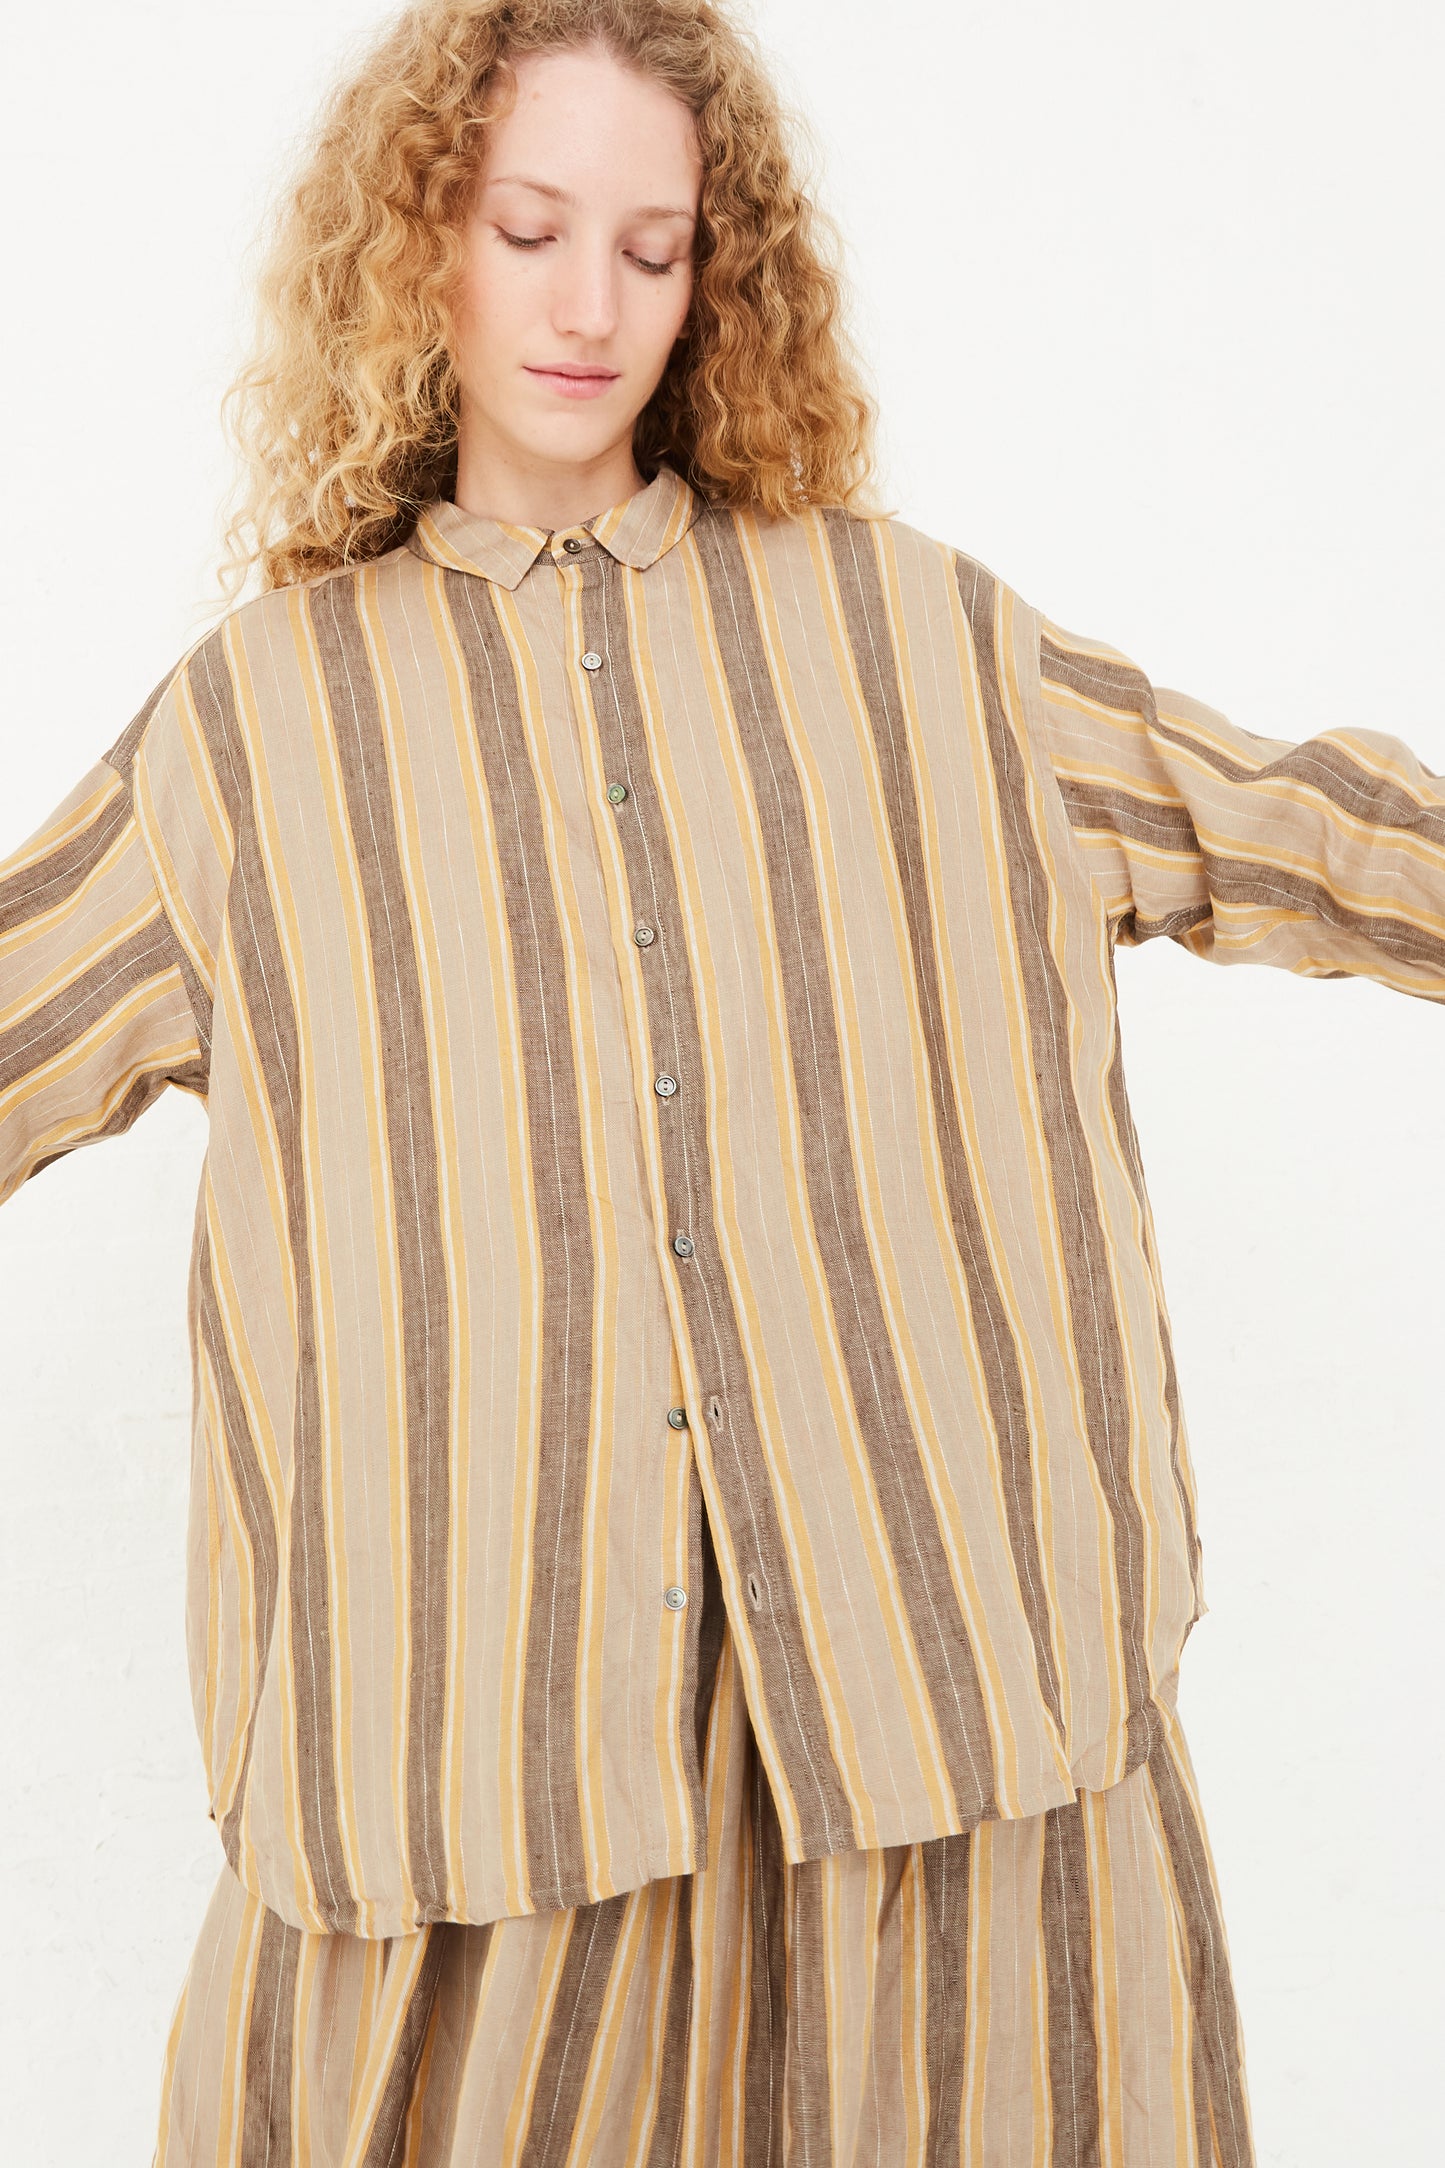 A model in a relaxed fit, Ichi Antiquités Linen Stripe Shirt in Mustard, available at Oroboro store in NYC.